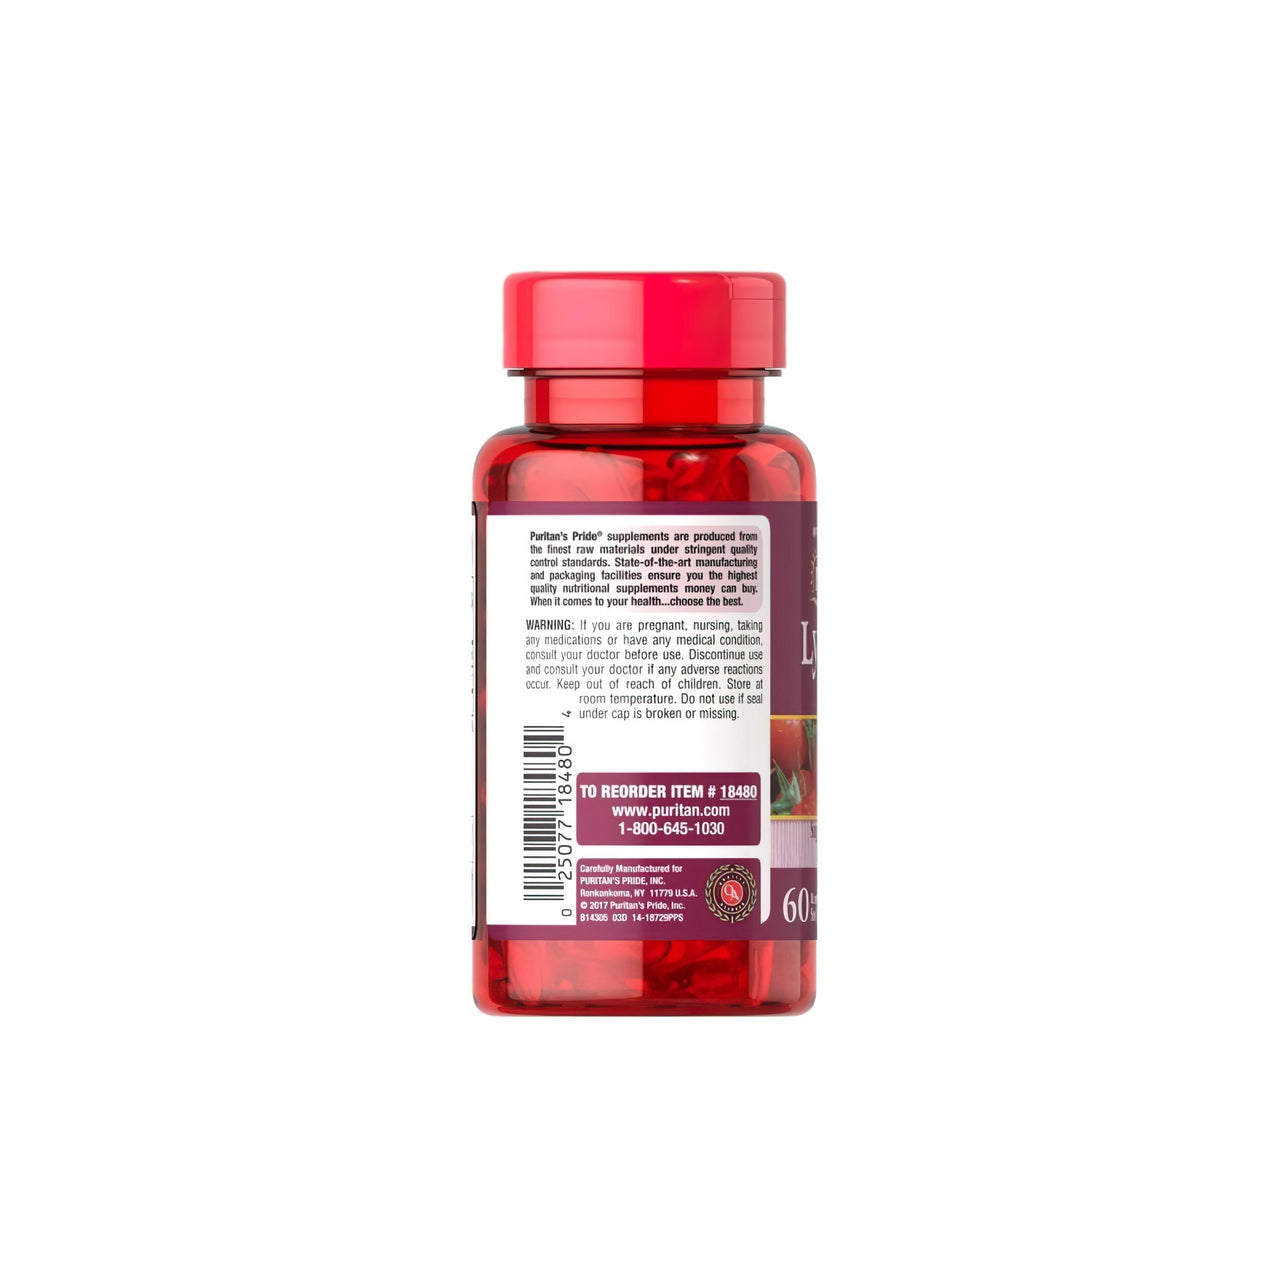 A bottle of Lycopene 40 mg 60 Rapid Release Softgels by Puritan's Pride on a white background.